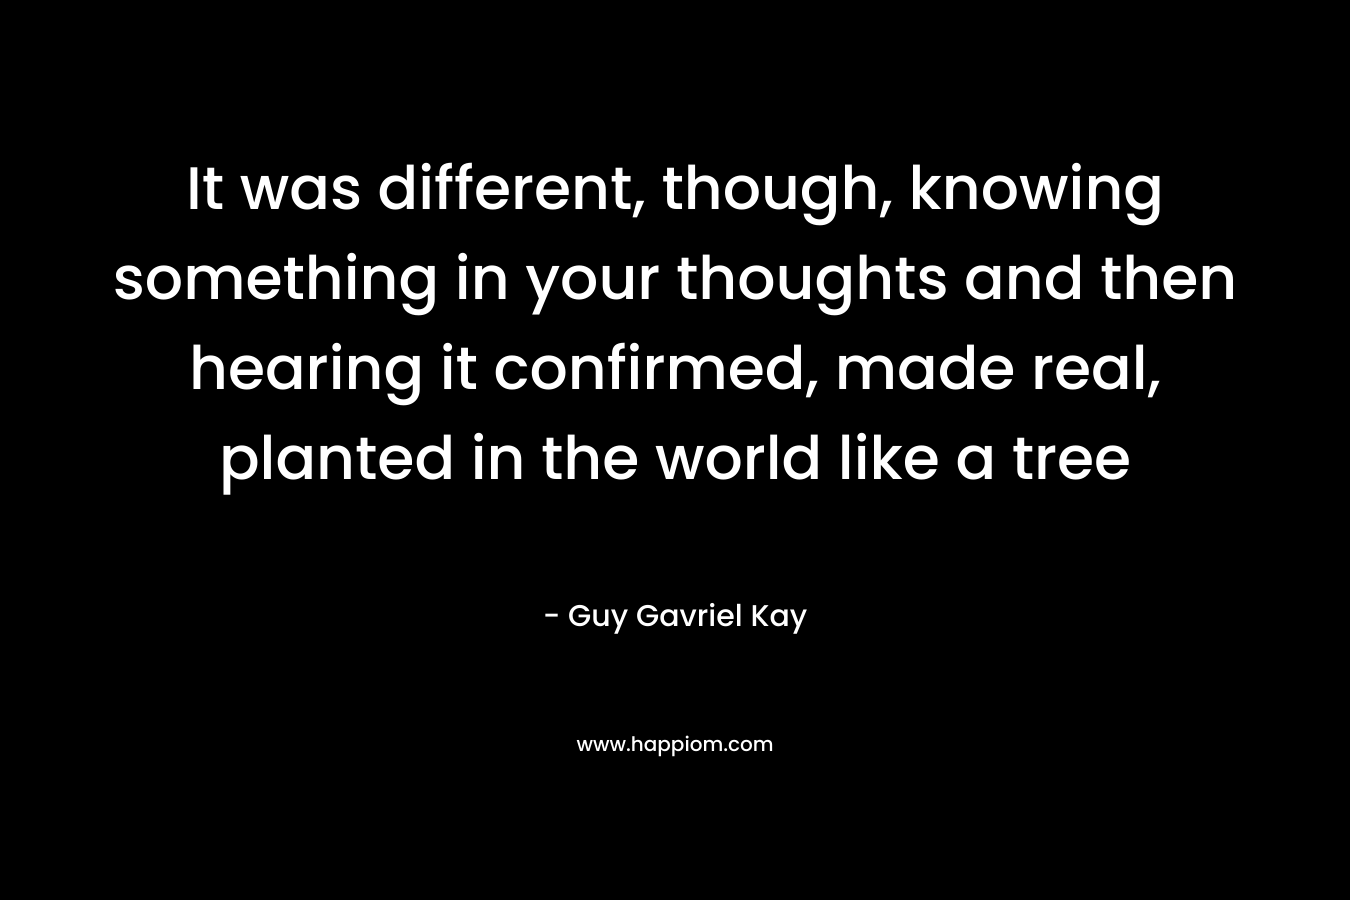 It was different, though, knowing something in your thoughts and then hearing it confirmed, made real, planted in the world like a tree